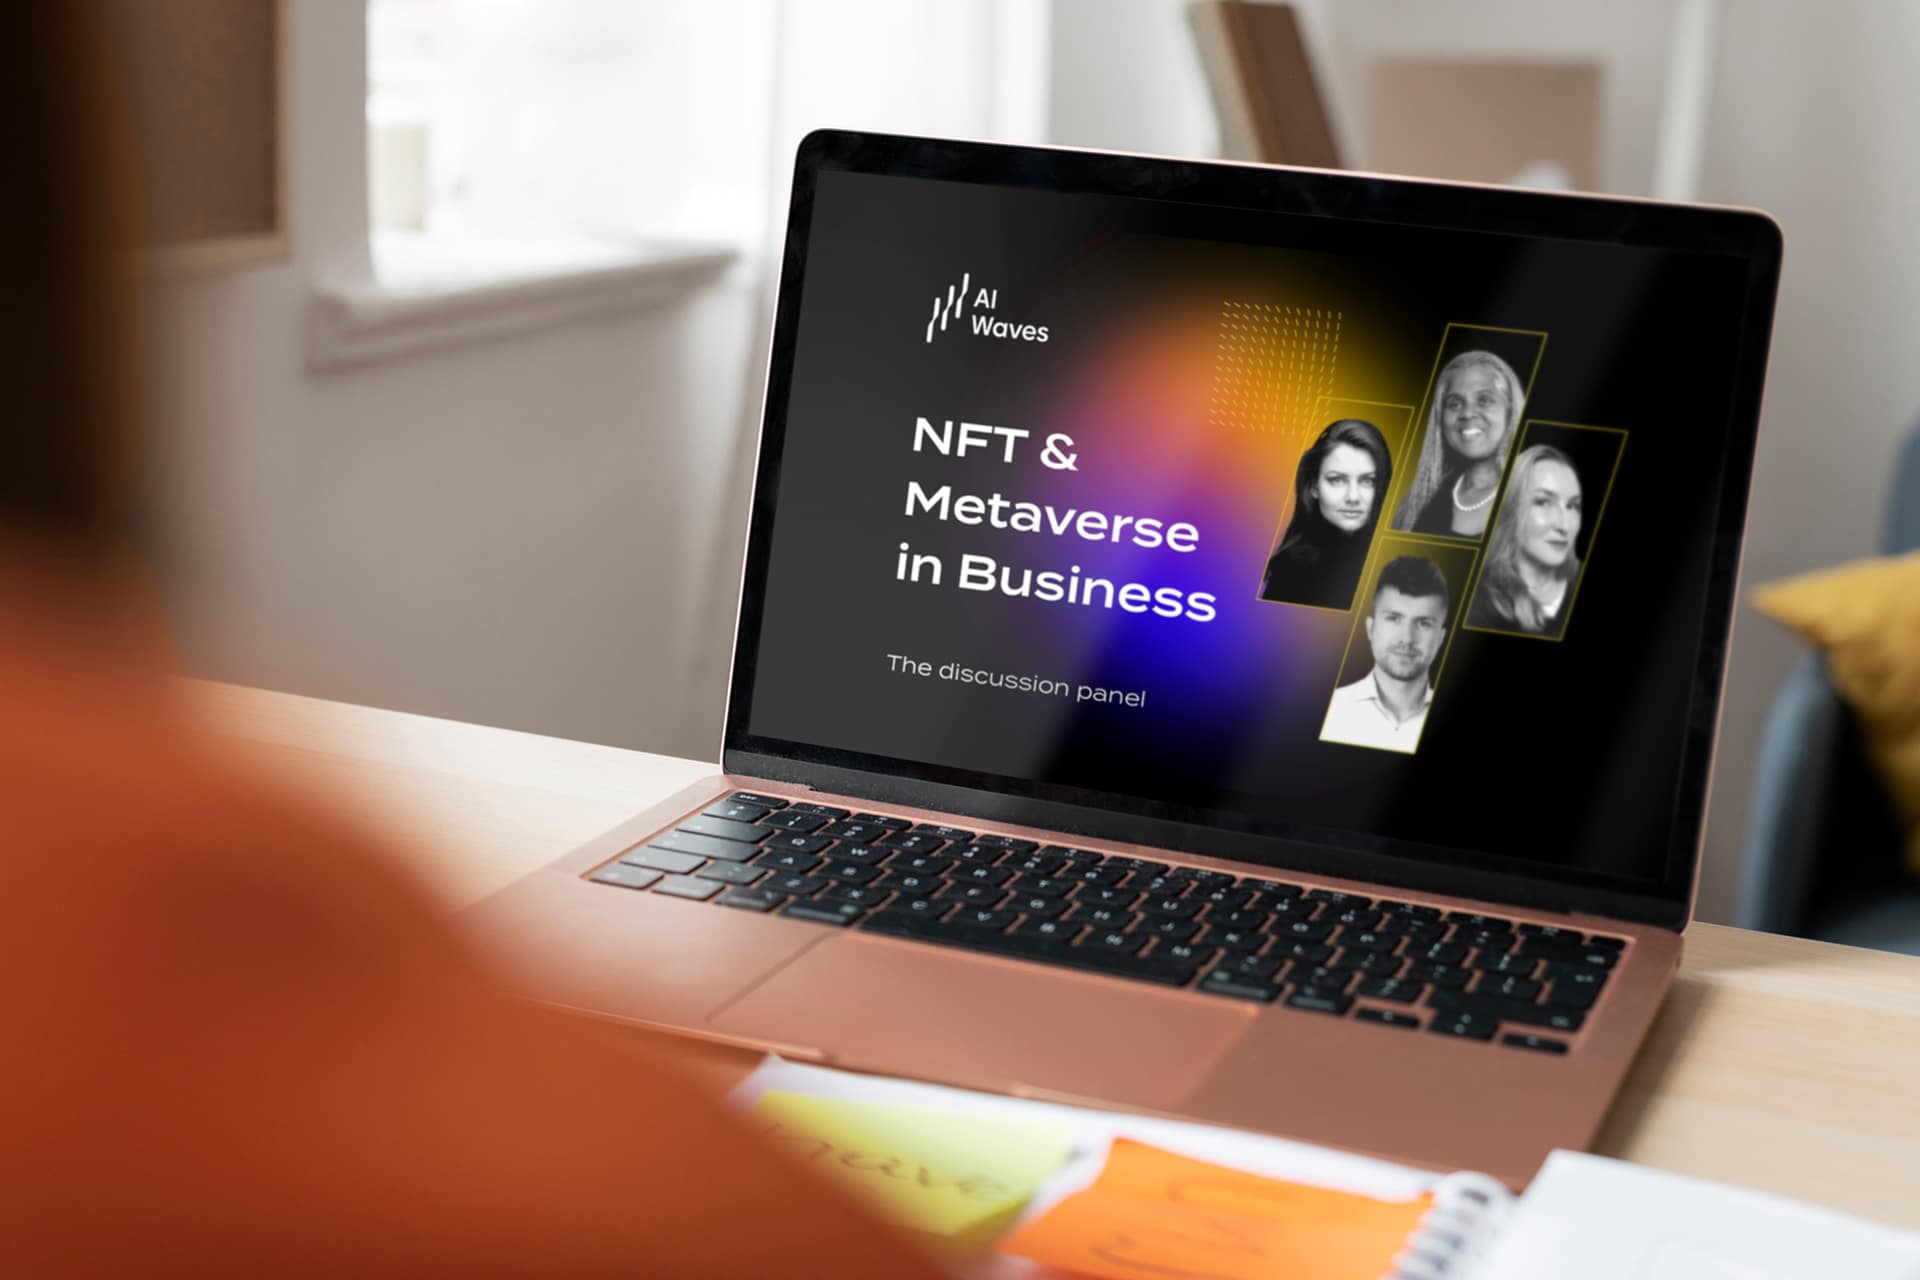 Metaverse and NFT business oportunities